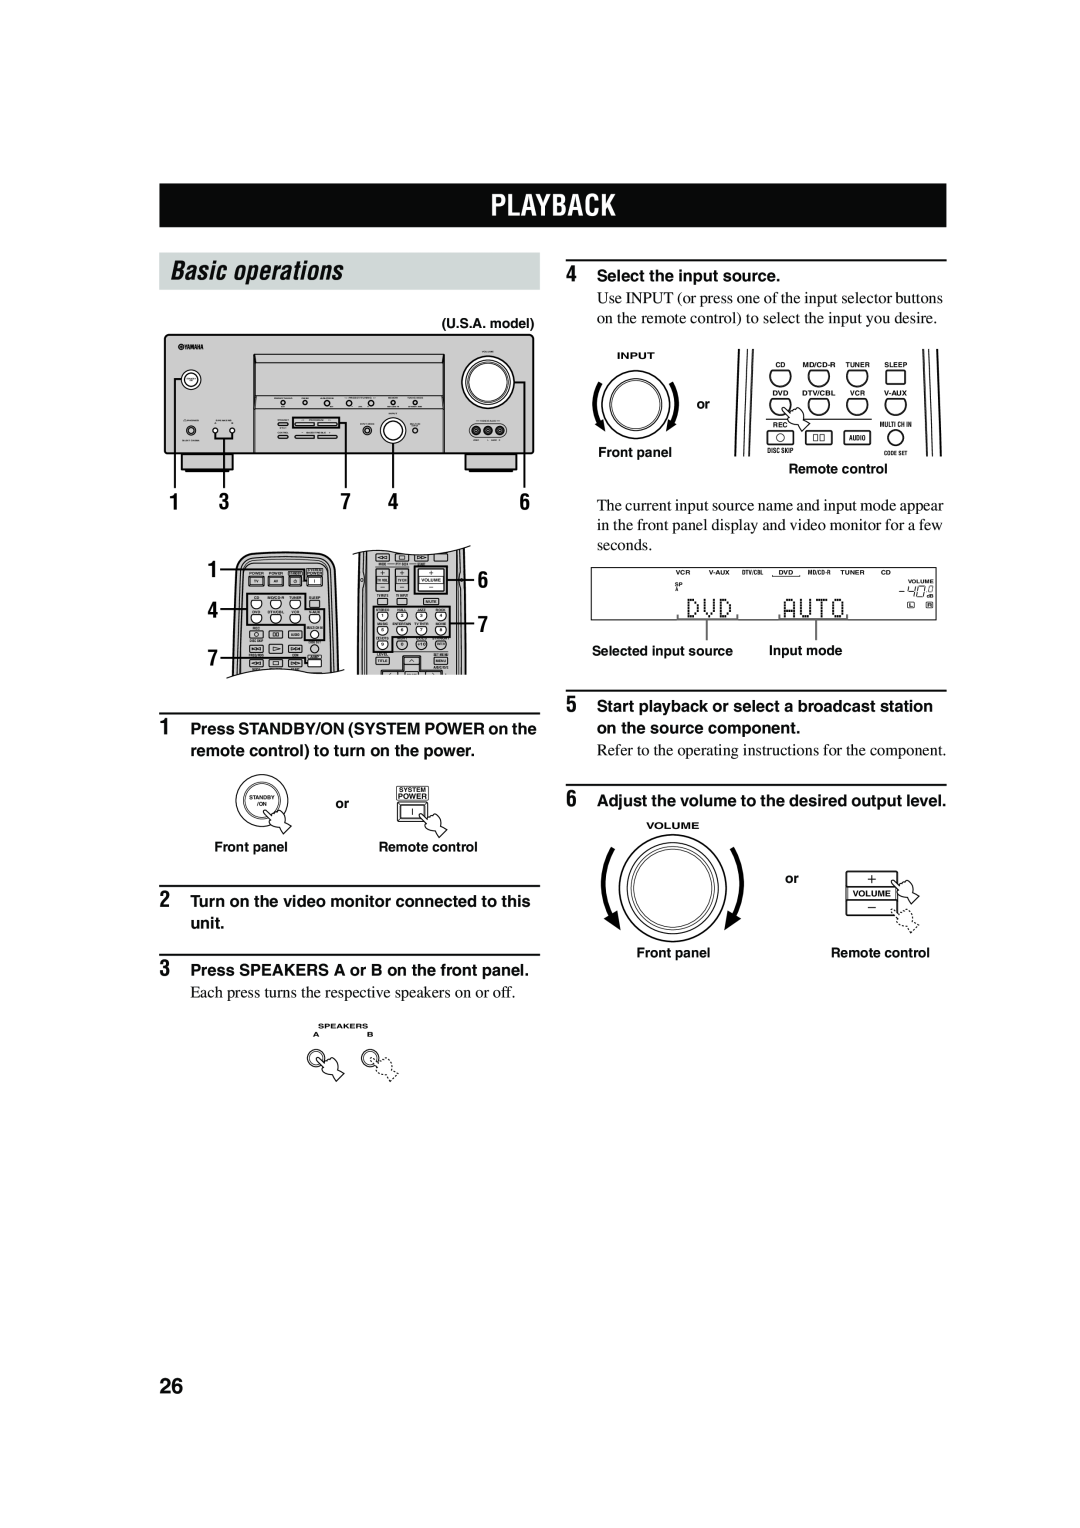 Yamaha RX-V450 owner manual Playback, Basic operations, 10DDVDD, AUTO00dB, 1 4 7, 4Select the input source 